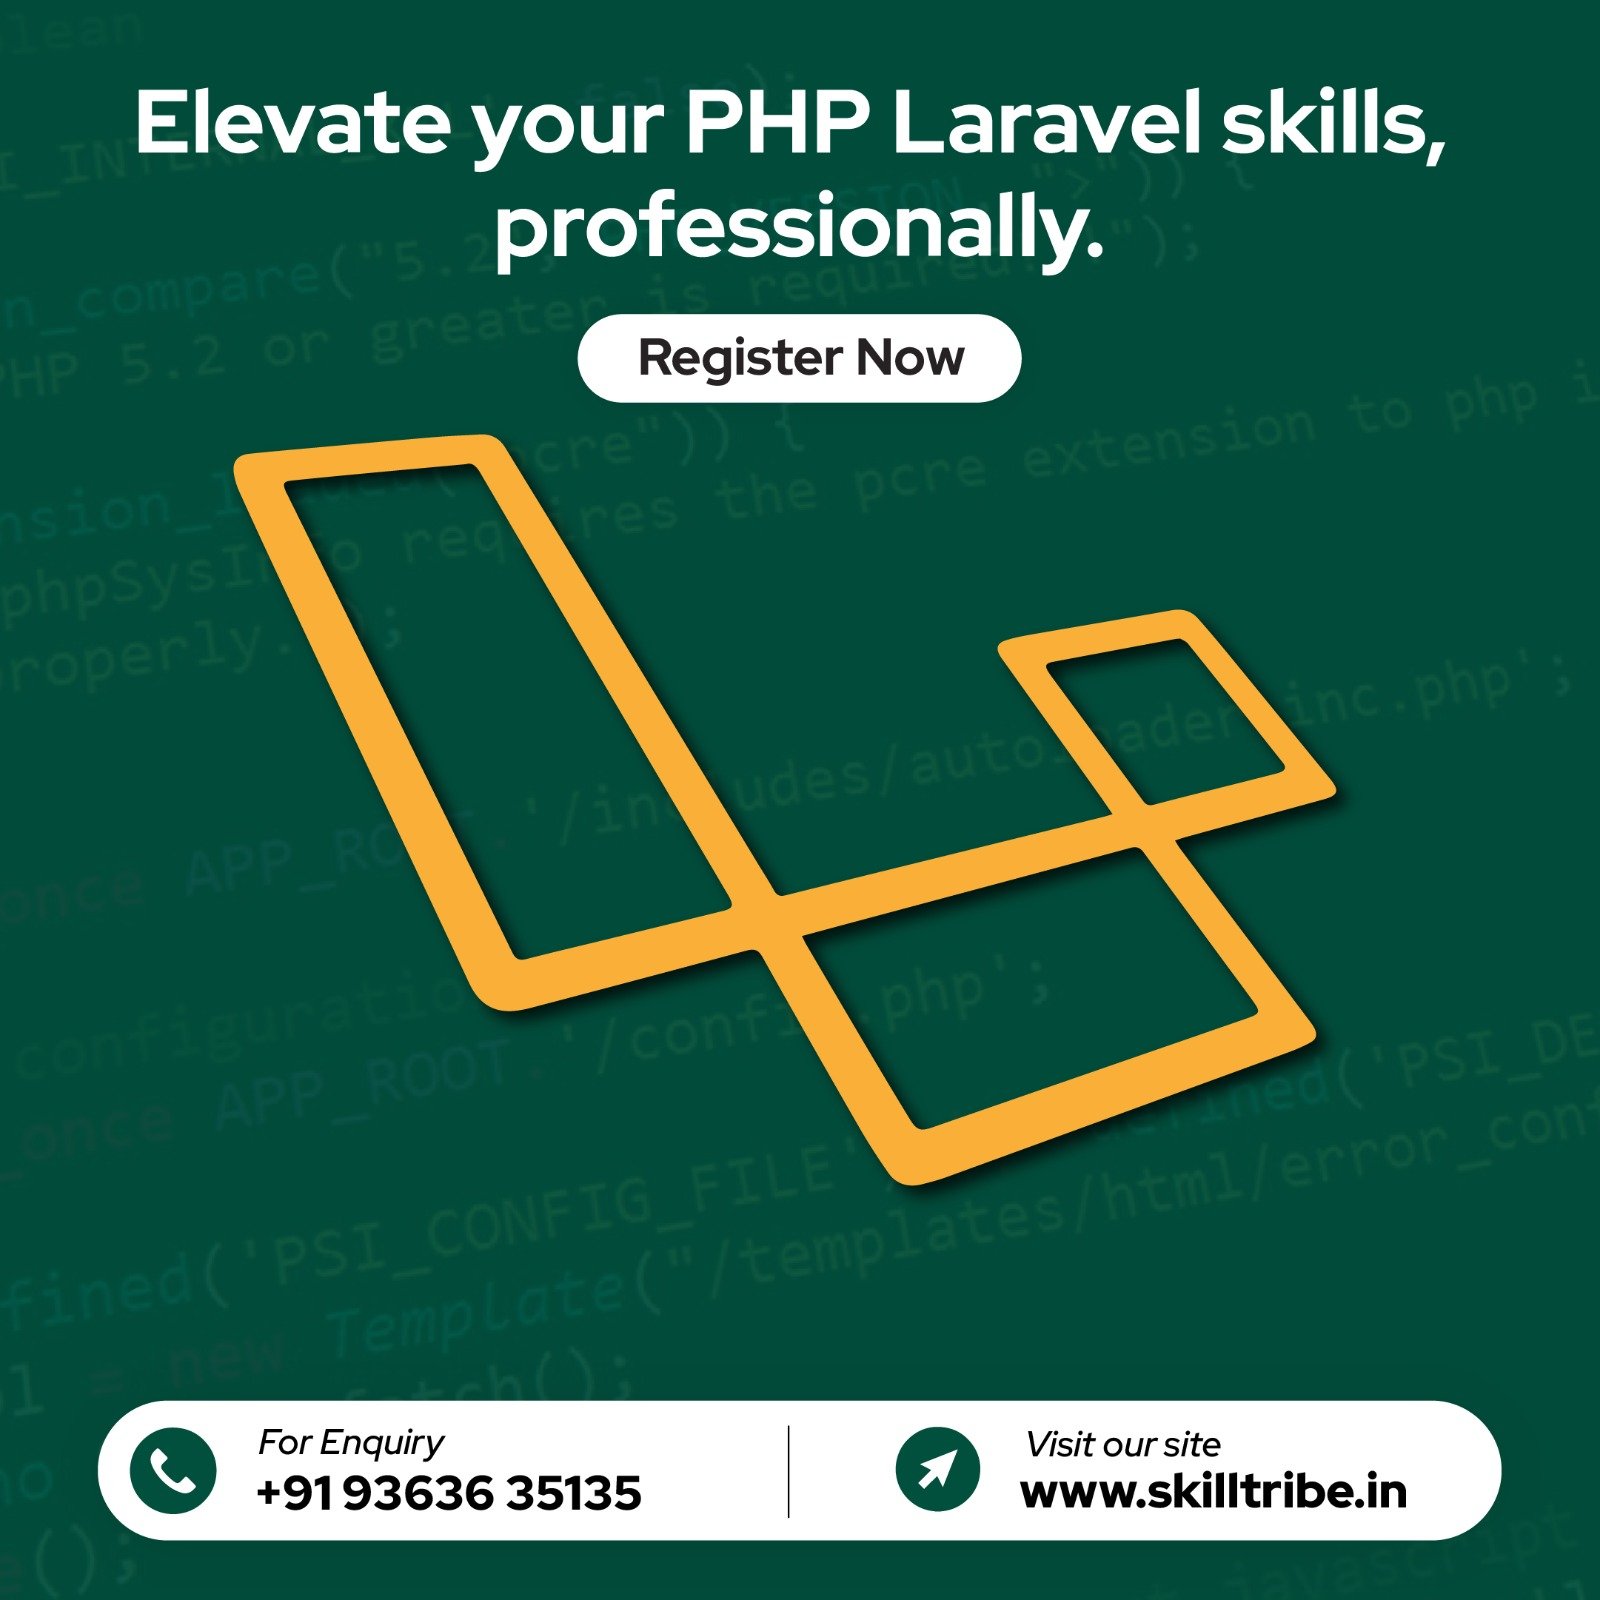 PHP Training in Chennai, Best PHP Training Institute in Chennai, PHP Training Institute in Chennai